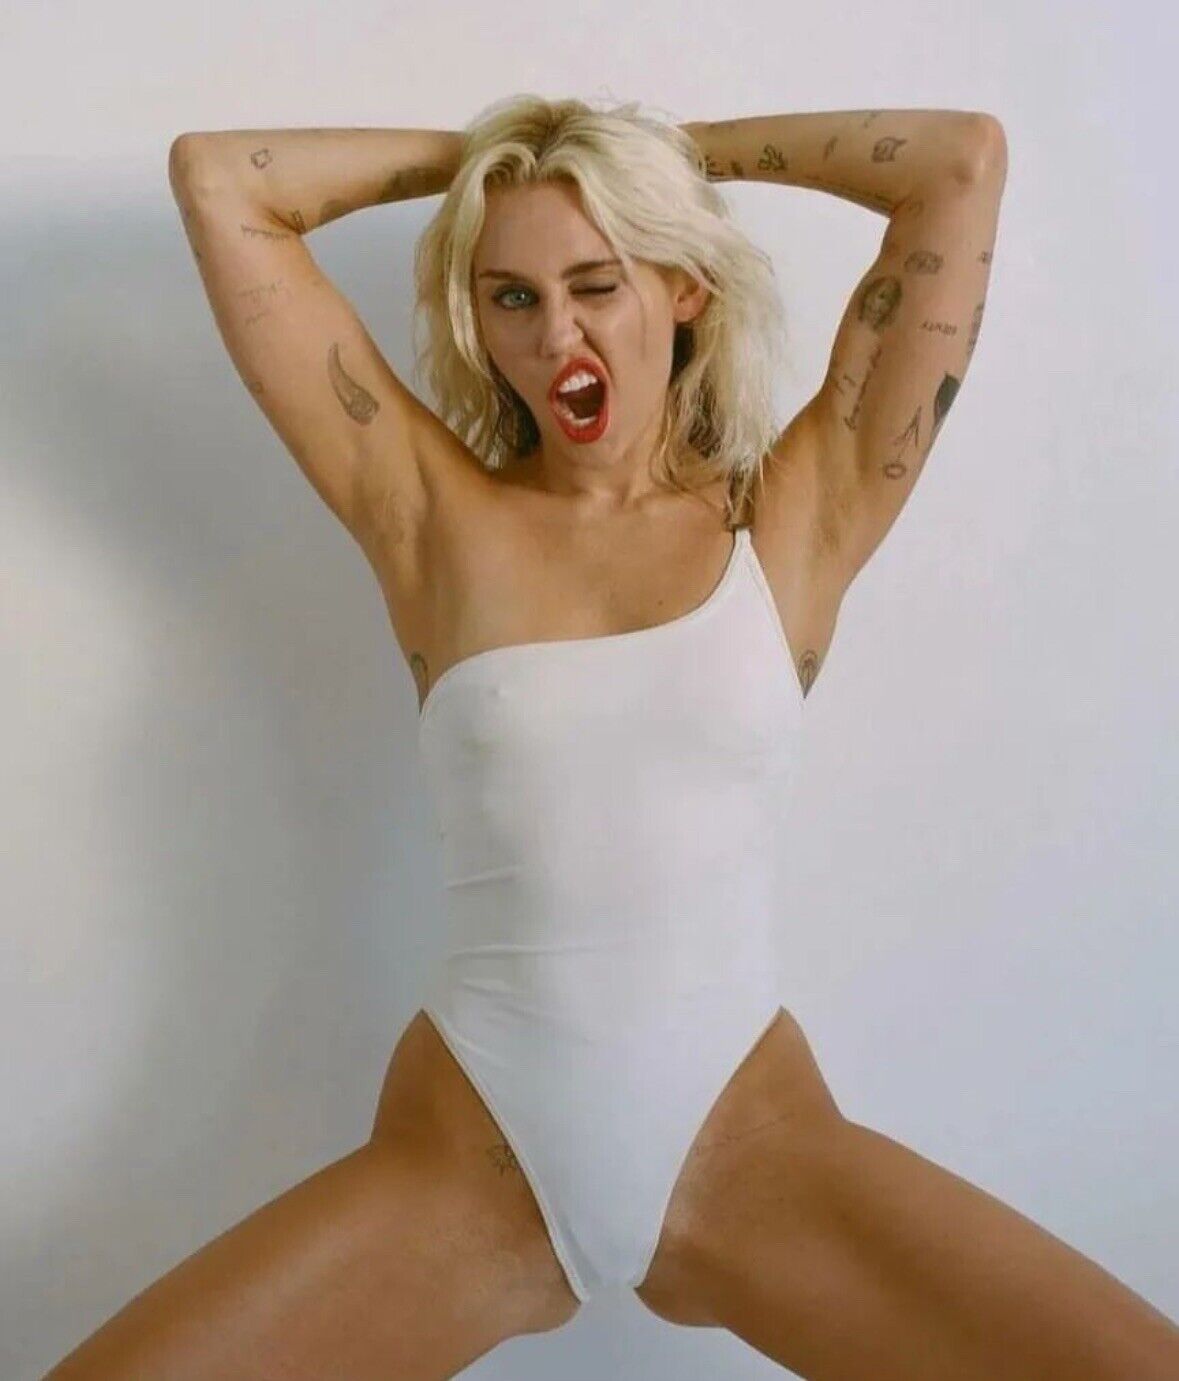 MILEY CYRUS - IN A WHITE ONE PIECE - LEGS OPEN 